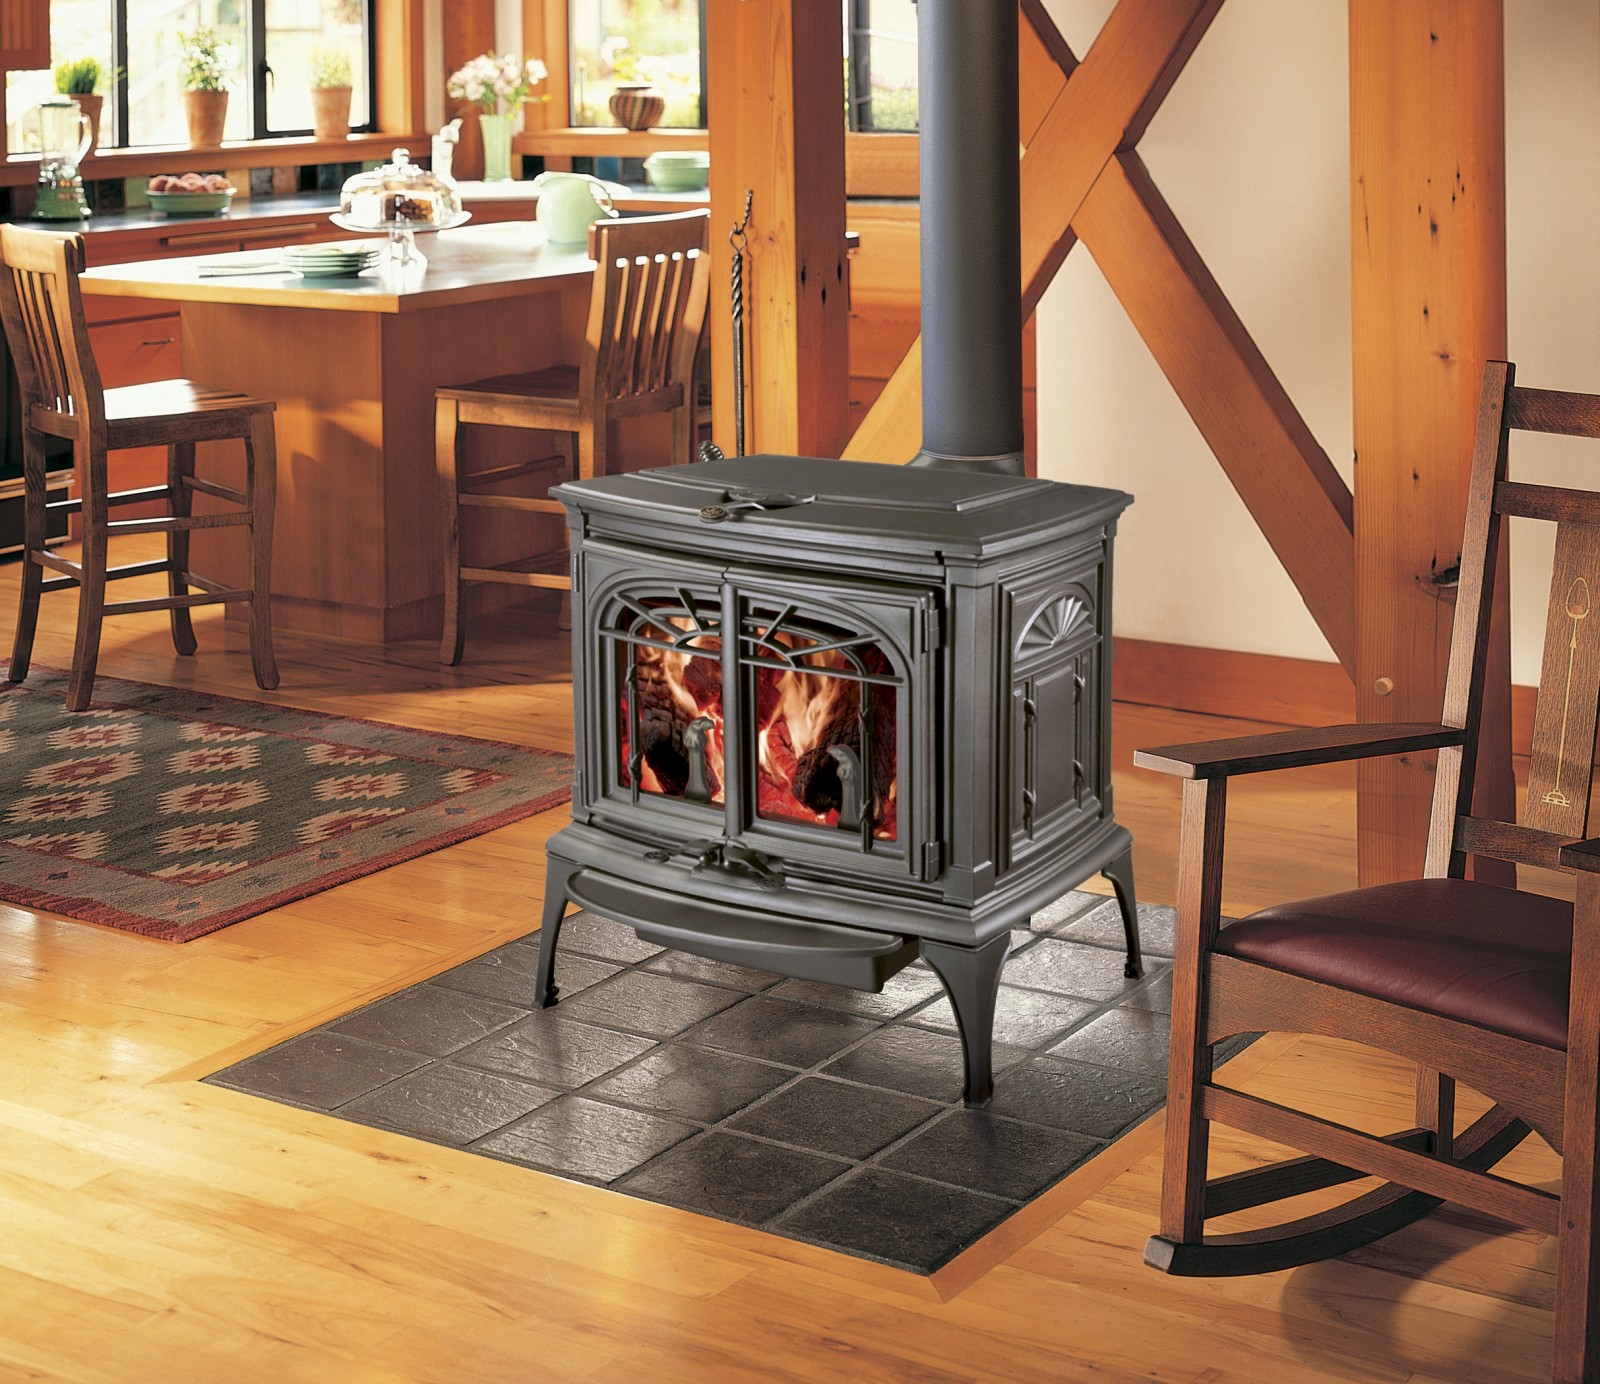 Choosing a Woodstove that is right for you - Heat'n Sweep